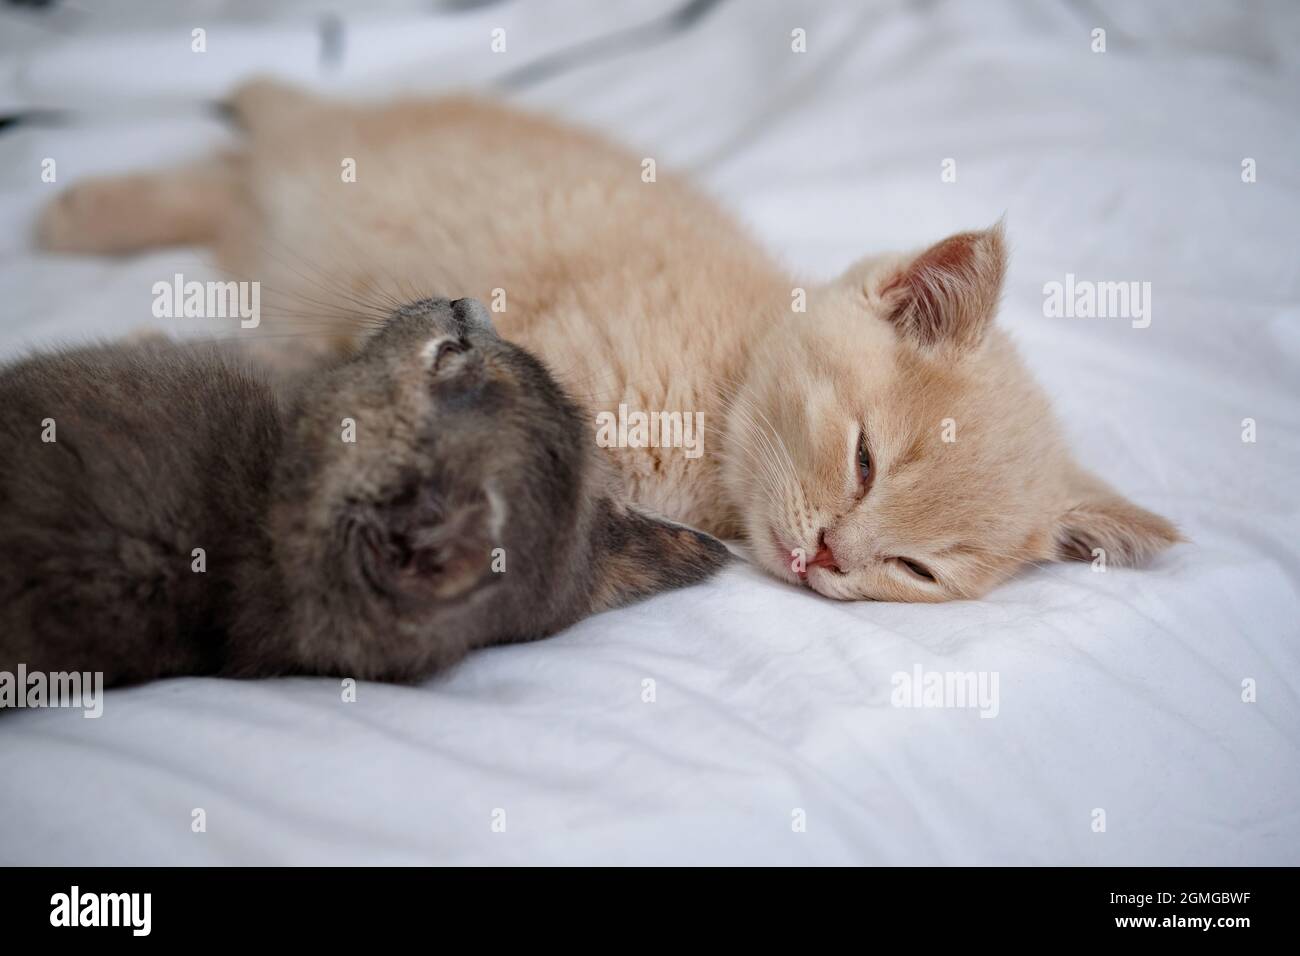 two lovely  kittens are sleeping on the white bedding cuddled together Stock Photo